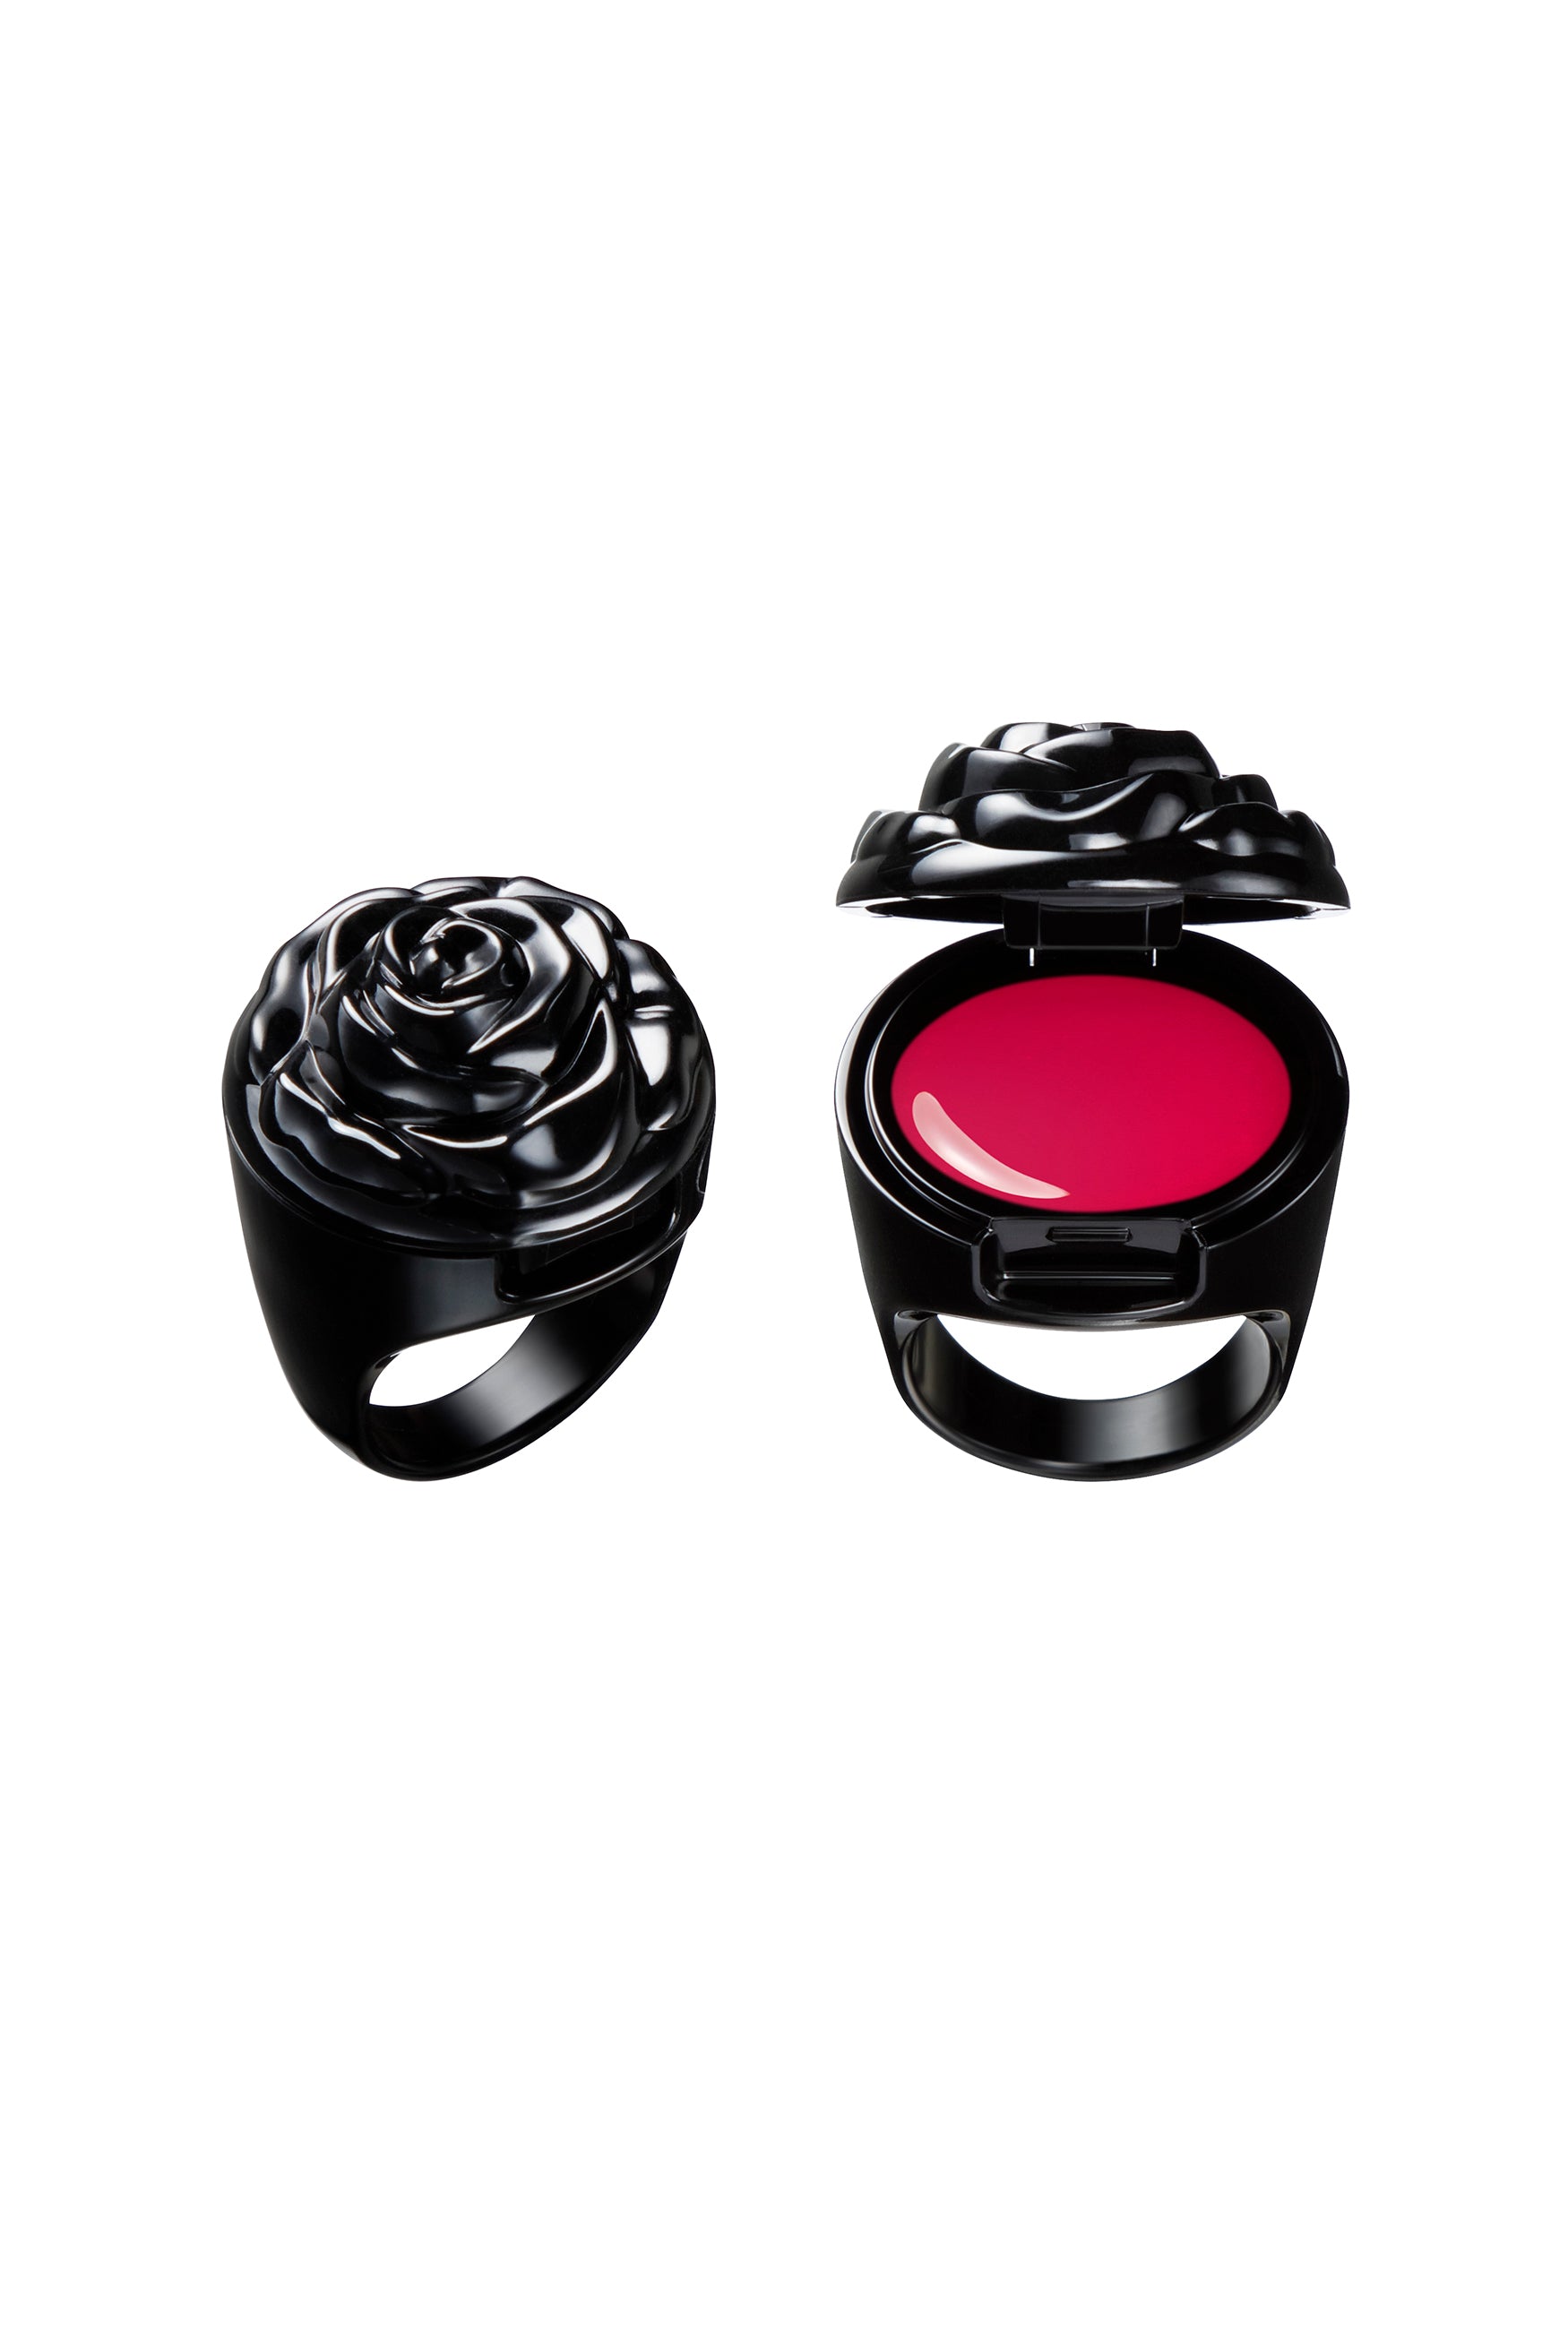 Ring Rouge is a makeup product that can be worn at finger as an accessory, TRUE RED rosa canina fruit extract moisturizer